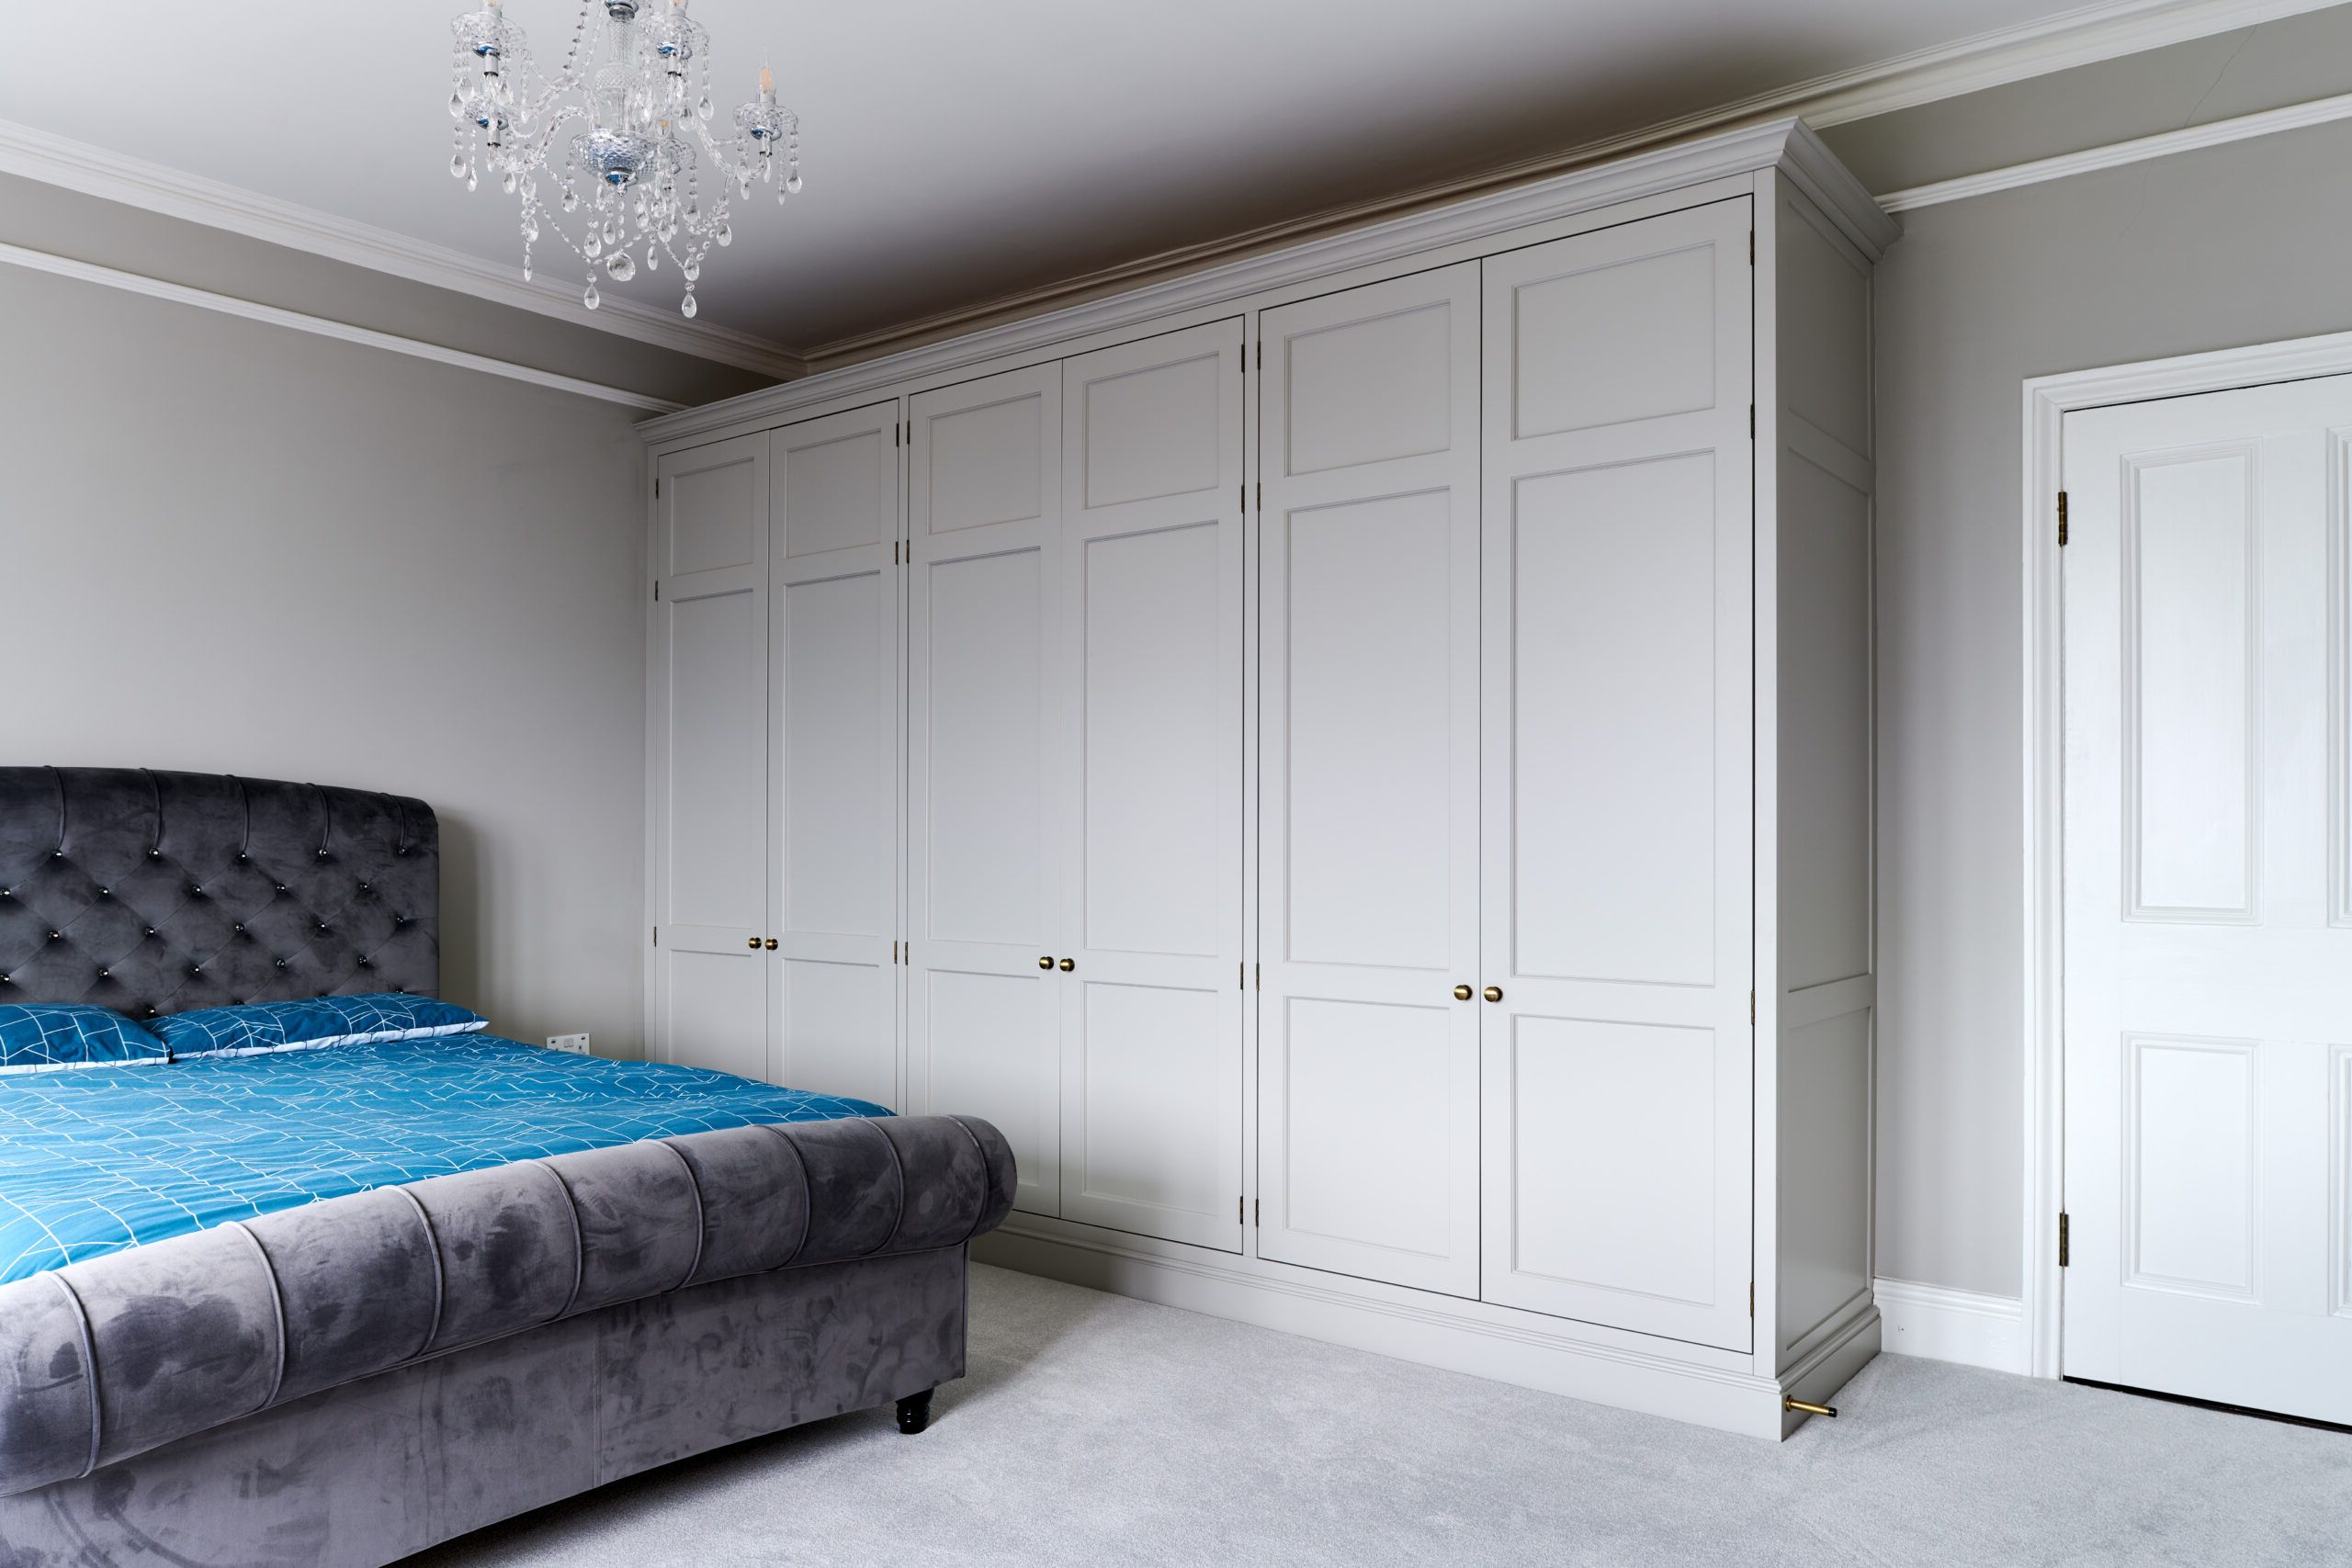 Fitted Or Freestanding Bespoke Wardrobes | Bath Bespoke Pertaining To French Style Fitted Wardrobes (View 13 of 20)